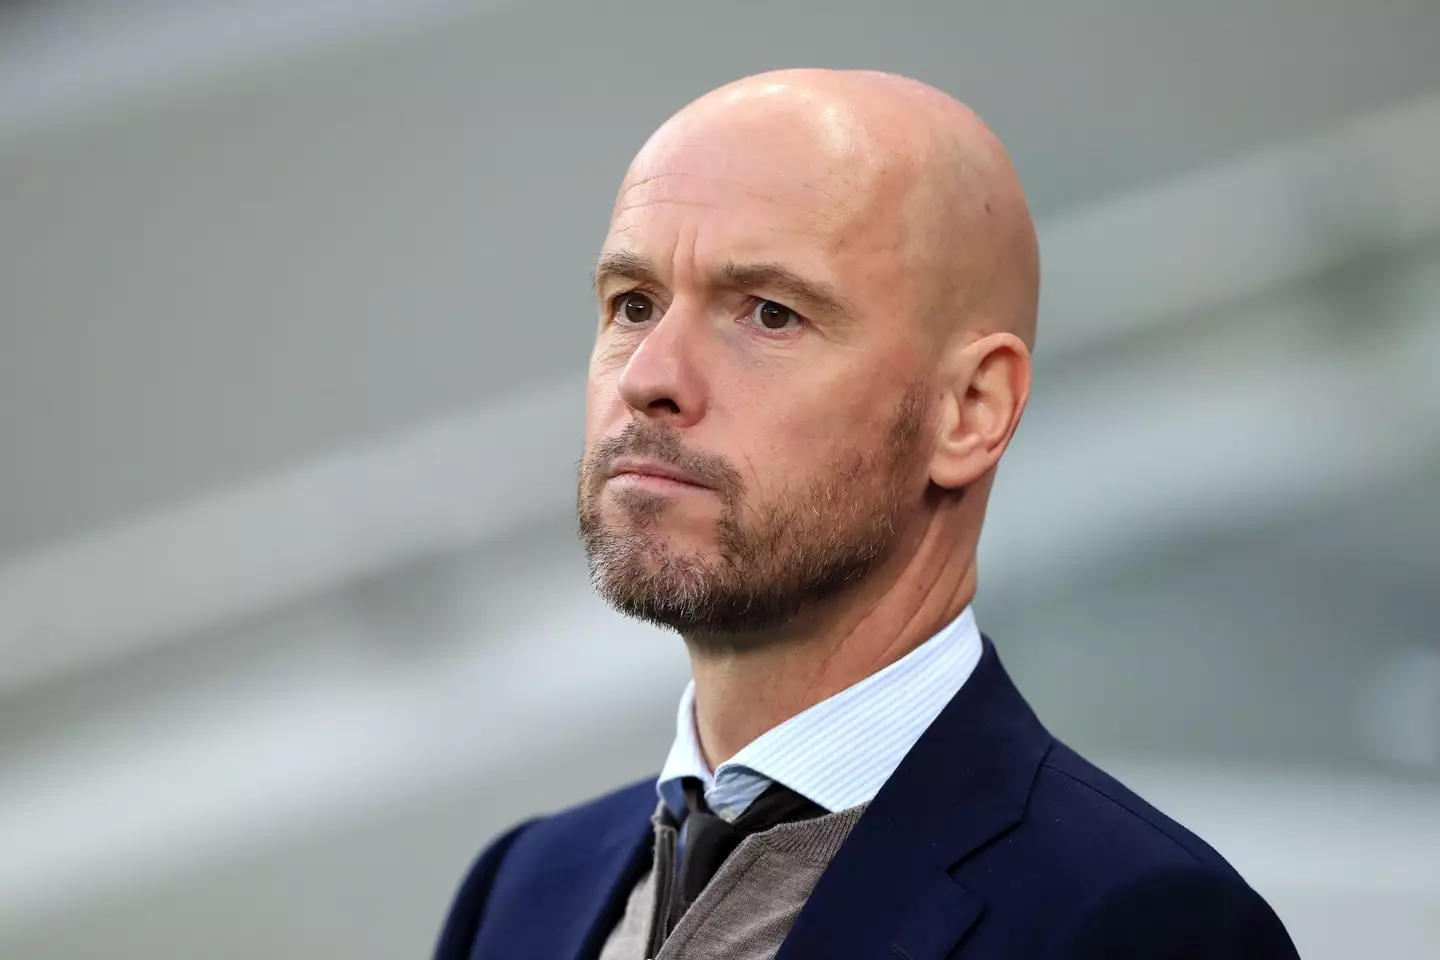 Ten Hag is expected to be appointed the next Manchester United manager (Image: PA)